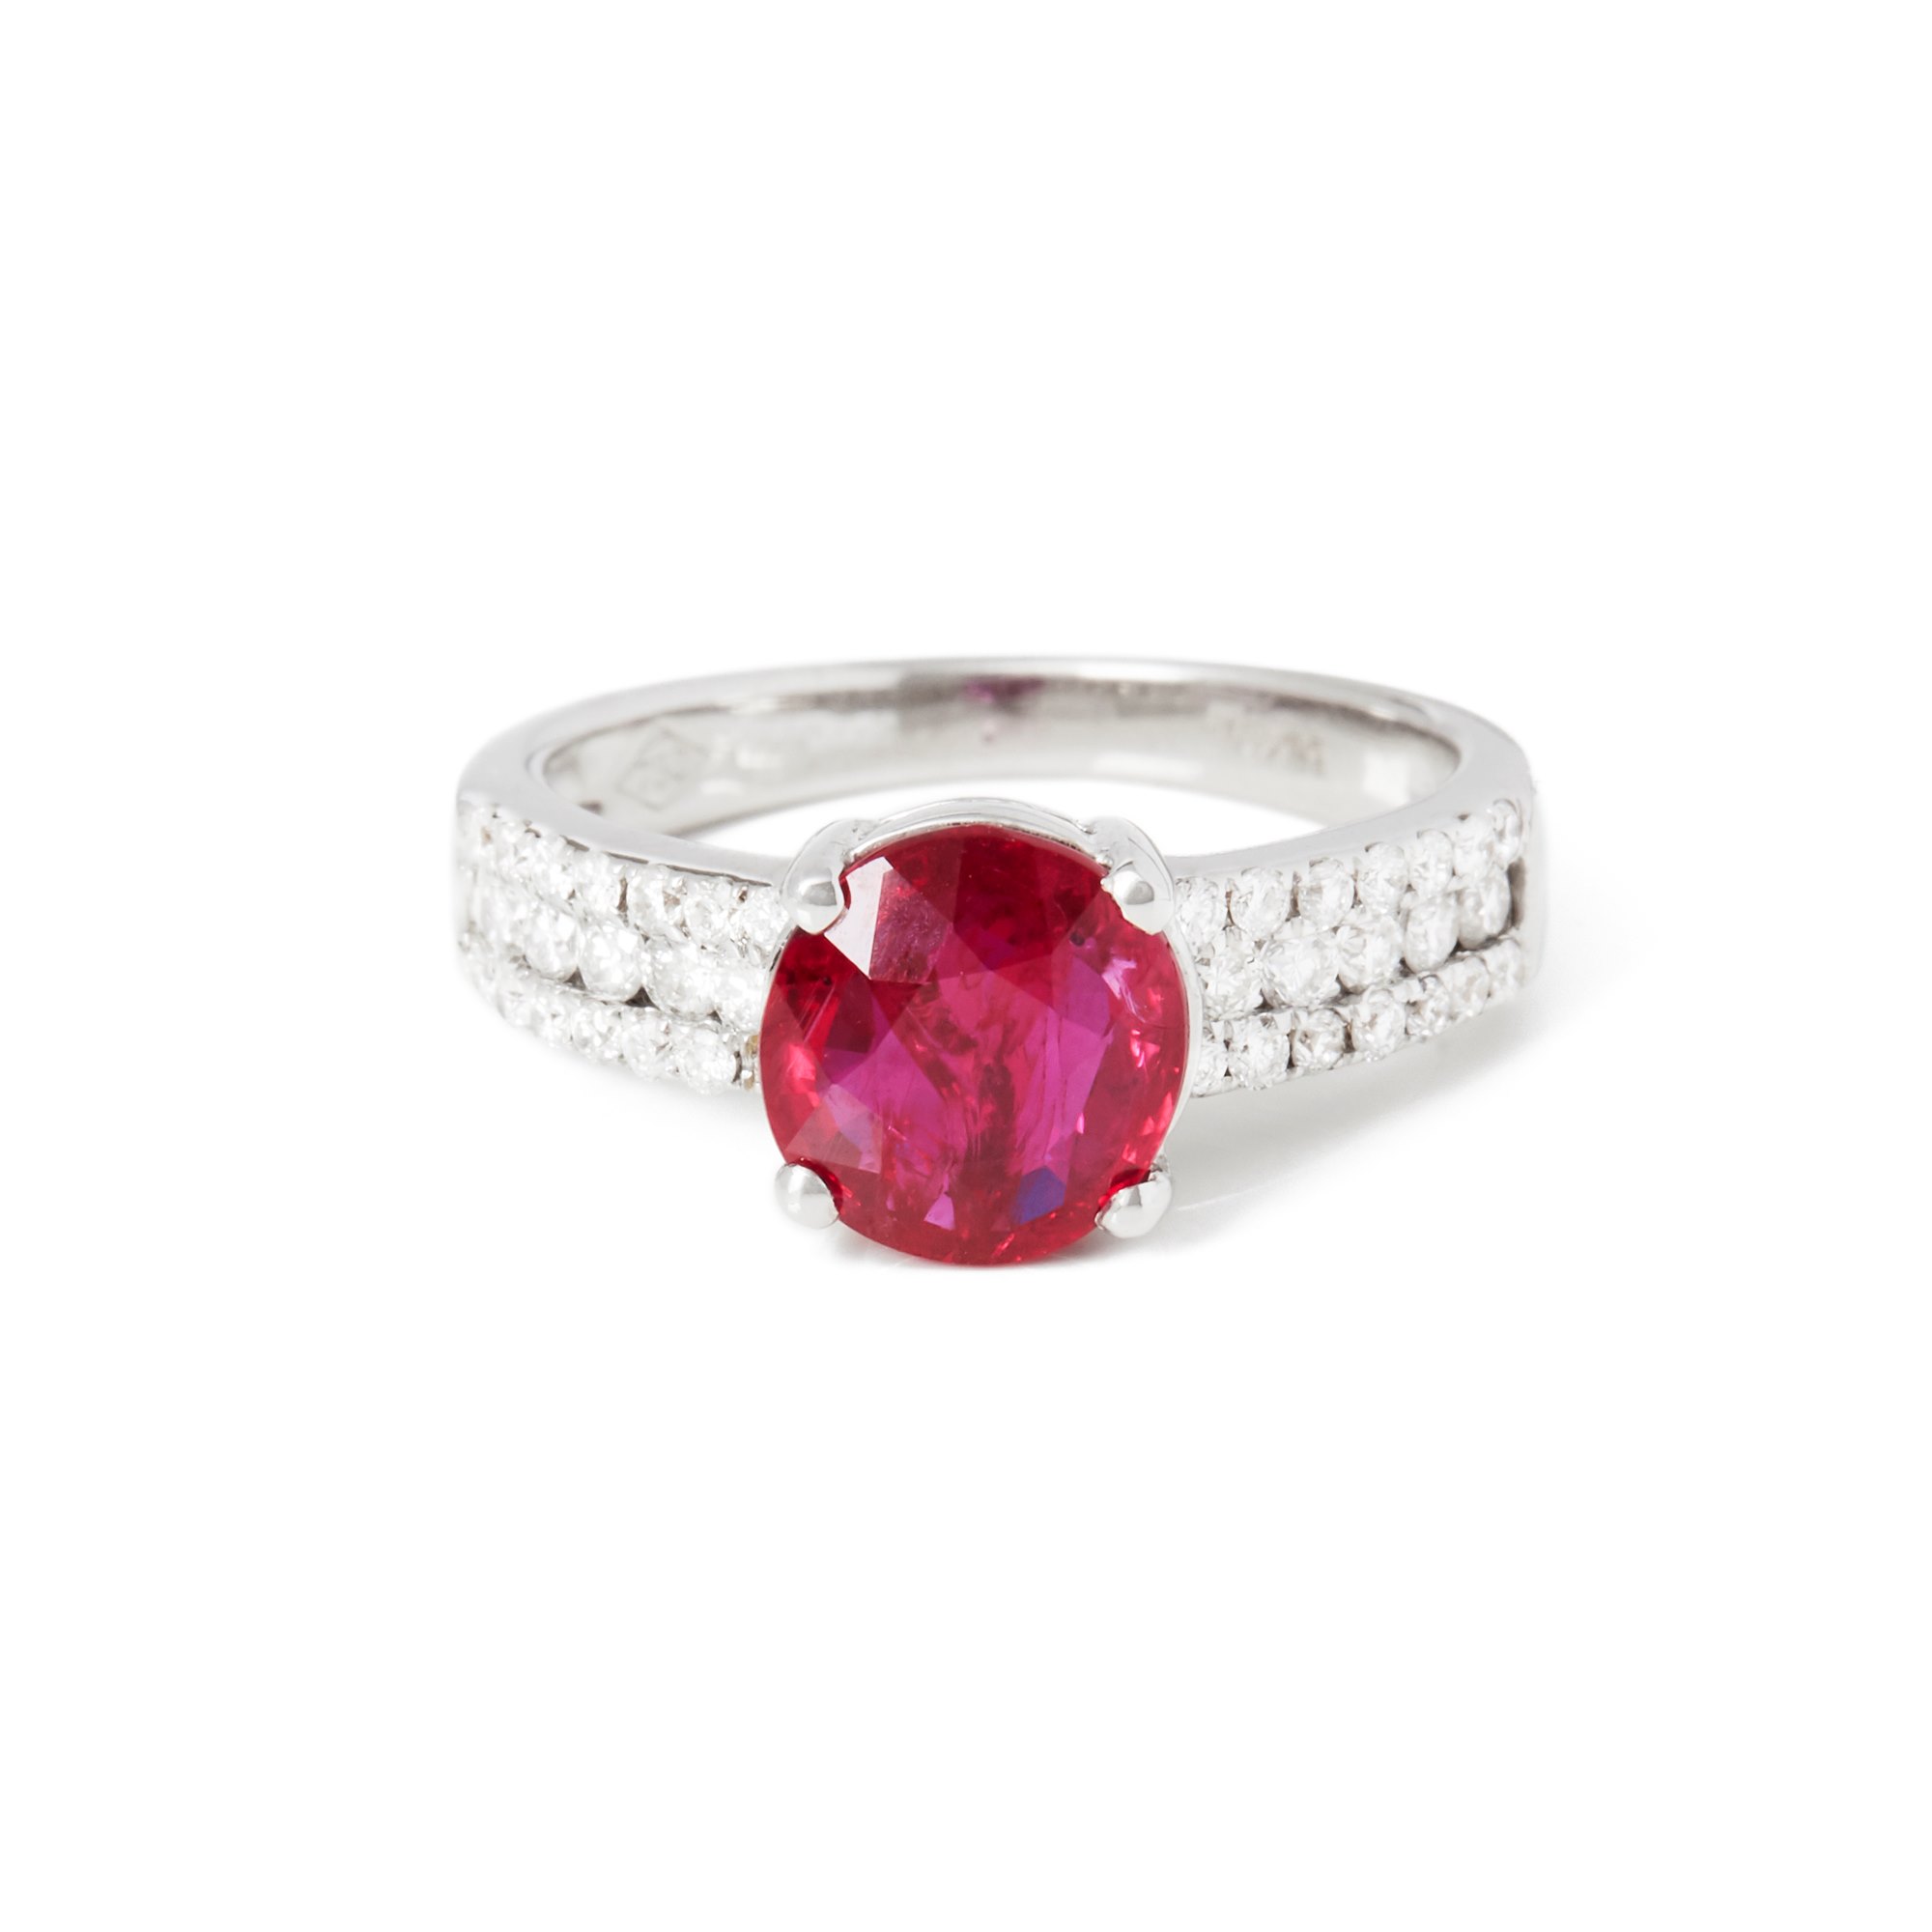 David Jerome Certified 2.03ct Untreated Unheated Round Cut Ruby and Diamond 18ct gold Ring